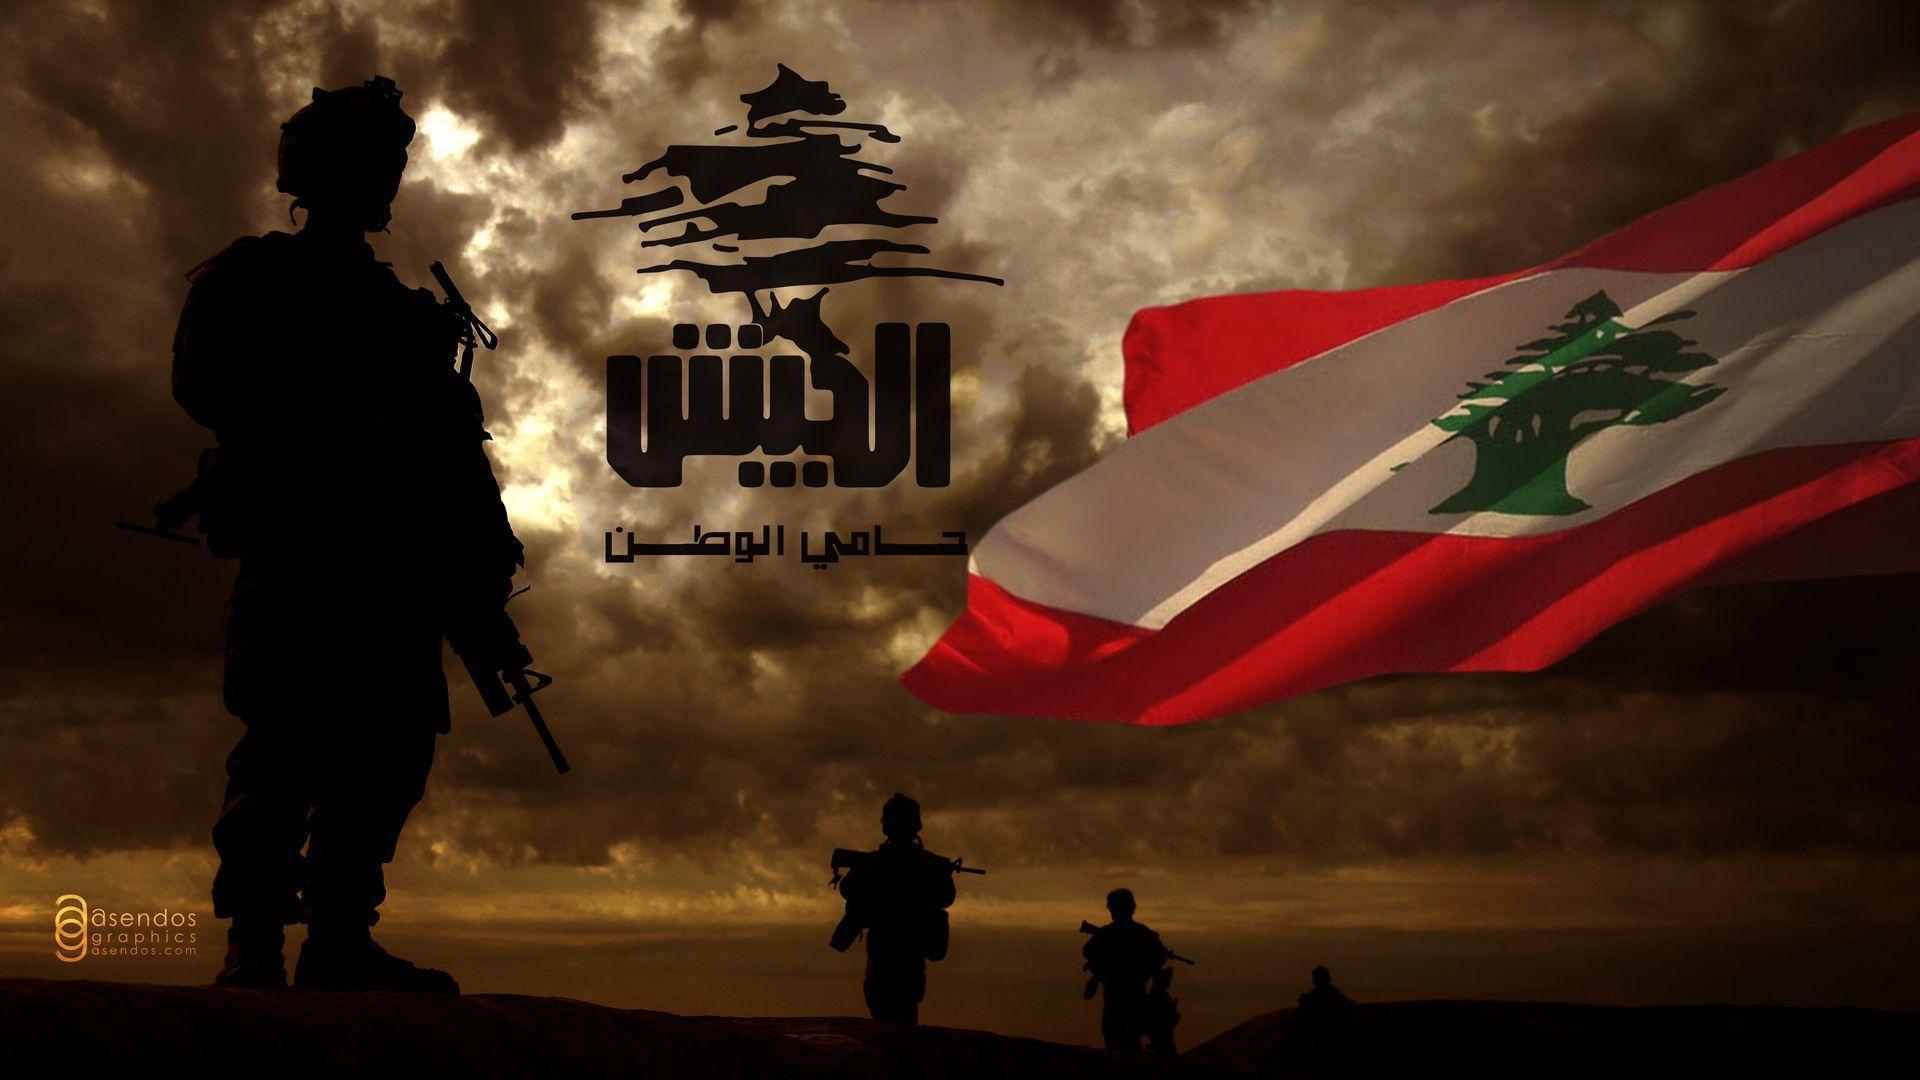 Lebanese army wallpapers